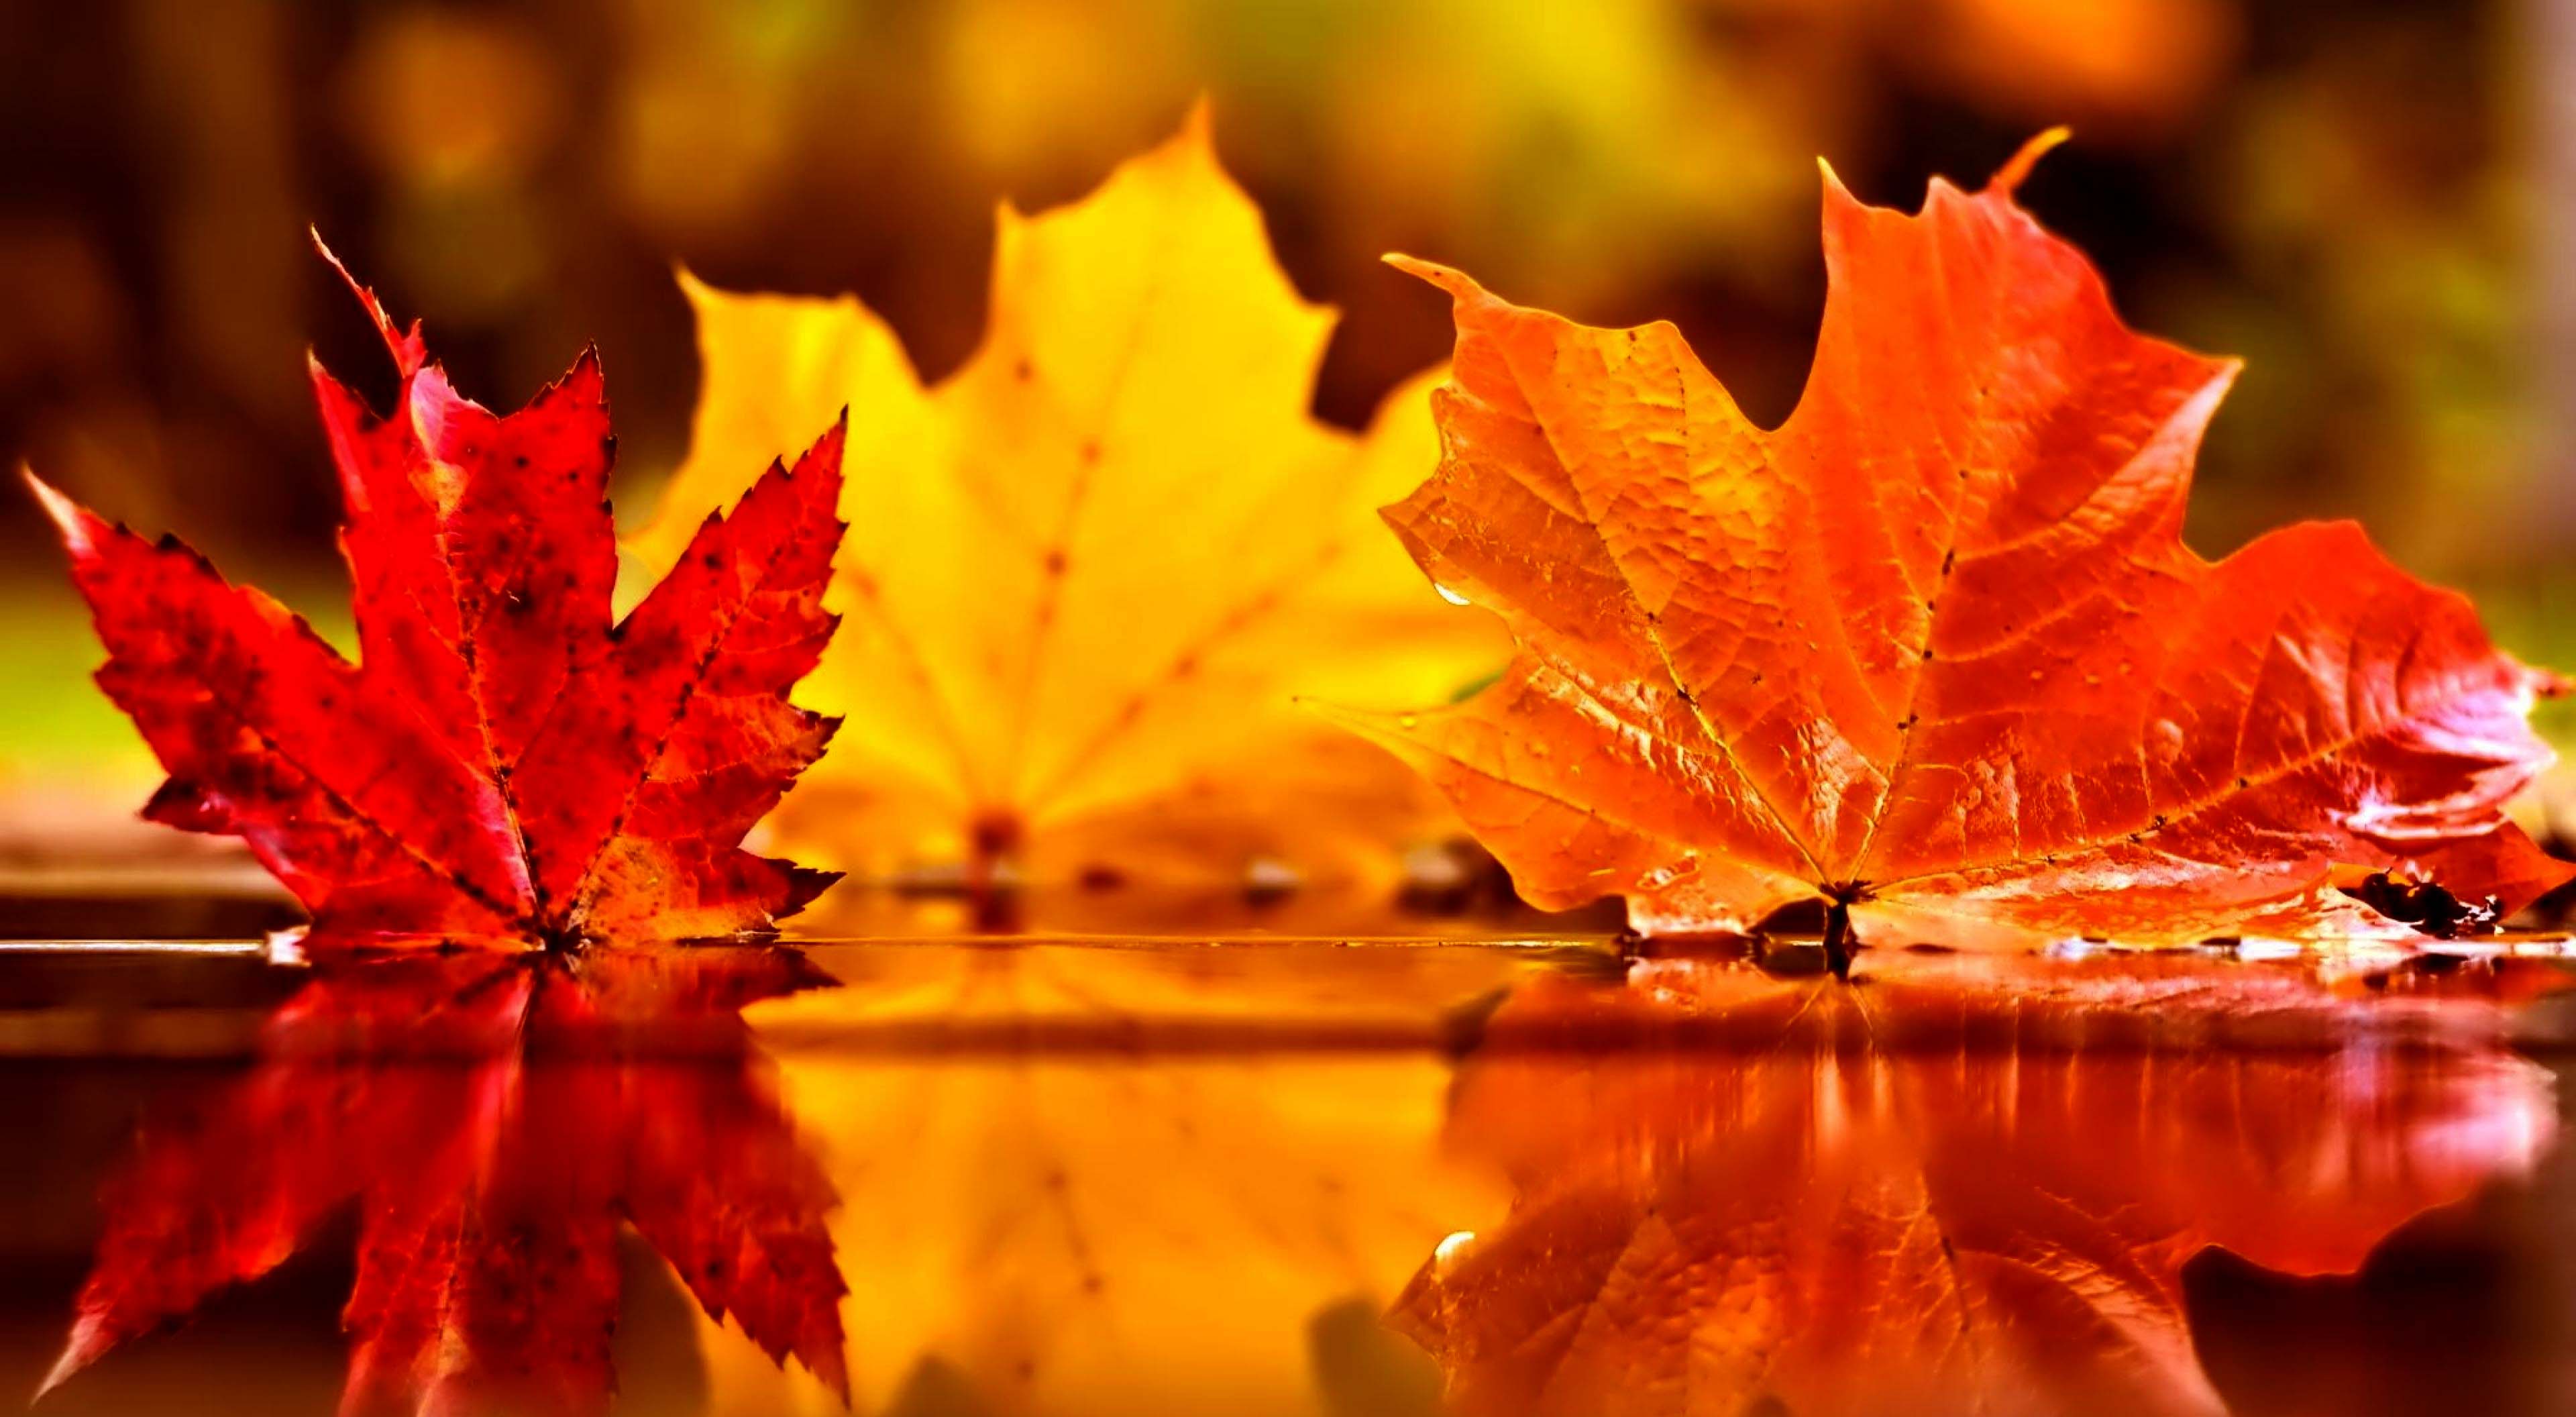 Autumn Leaves On Water Wallpaper Background. Autumn Wallpaper, Best Autumn Wallpaper and Lonely Autumn HD Wallpaper